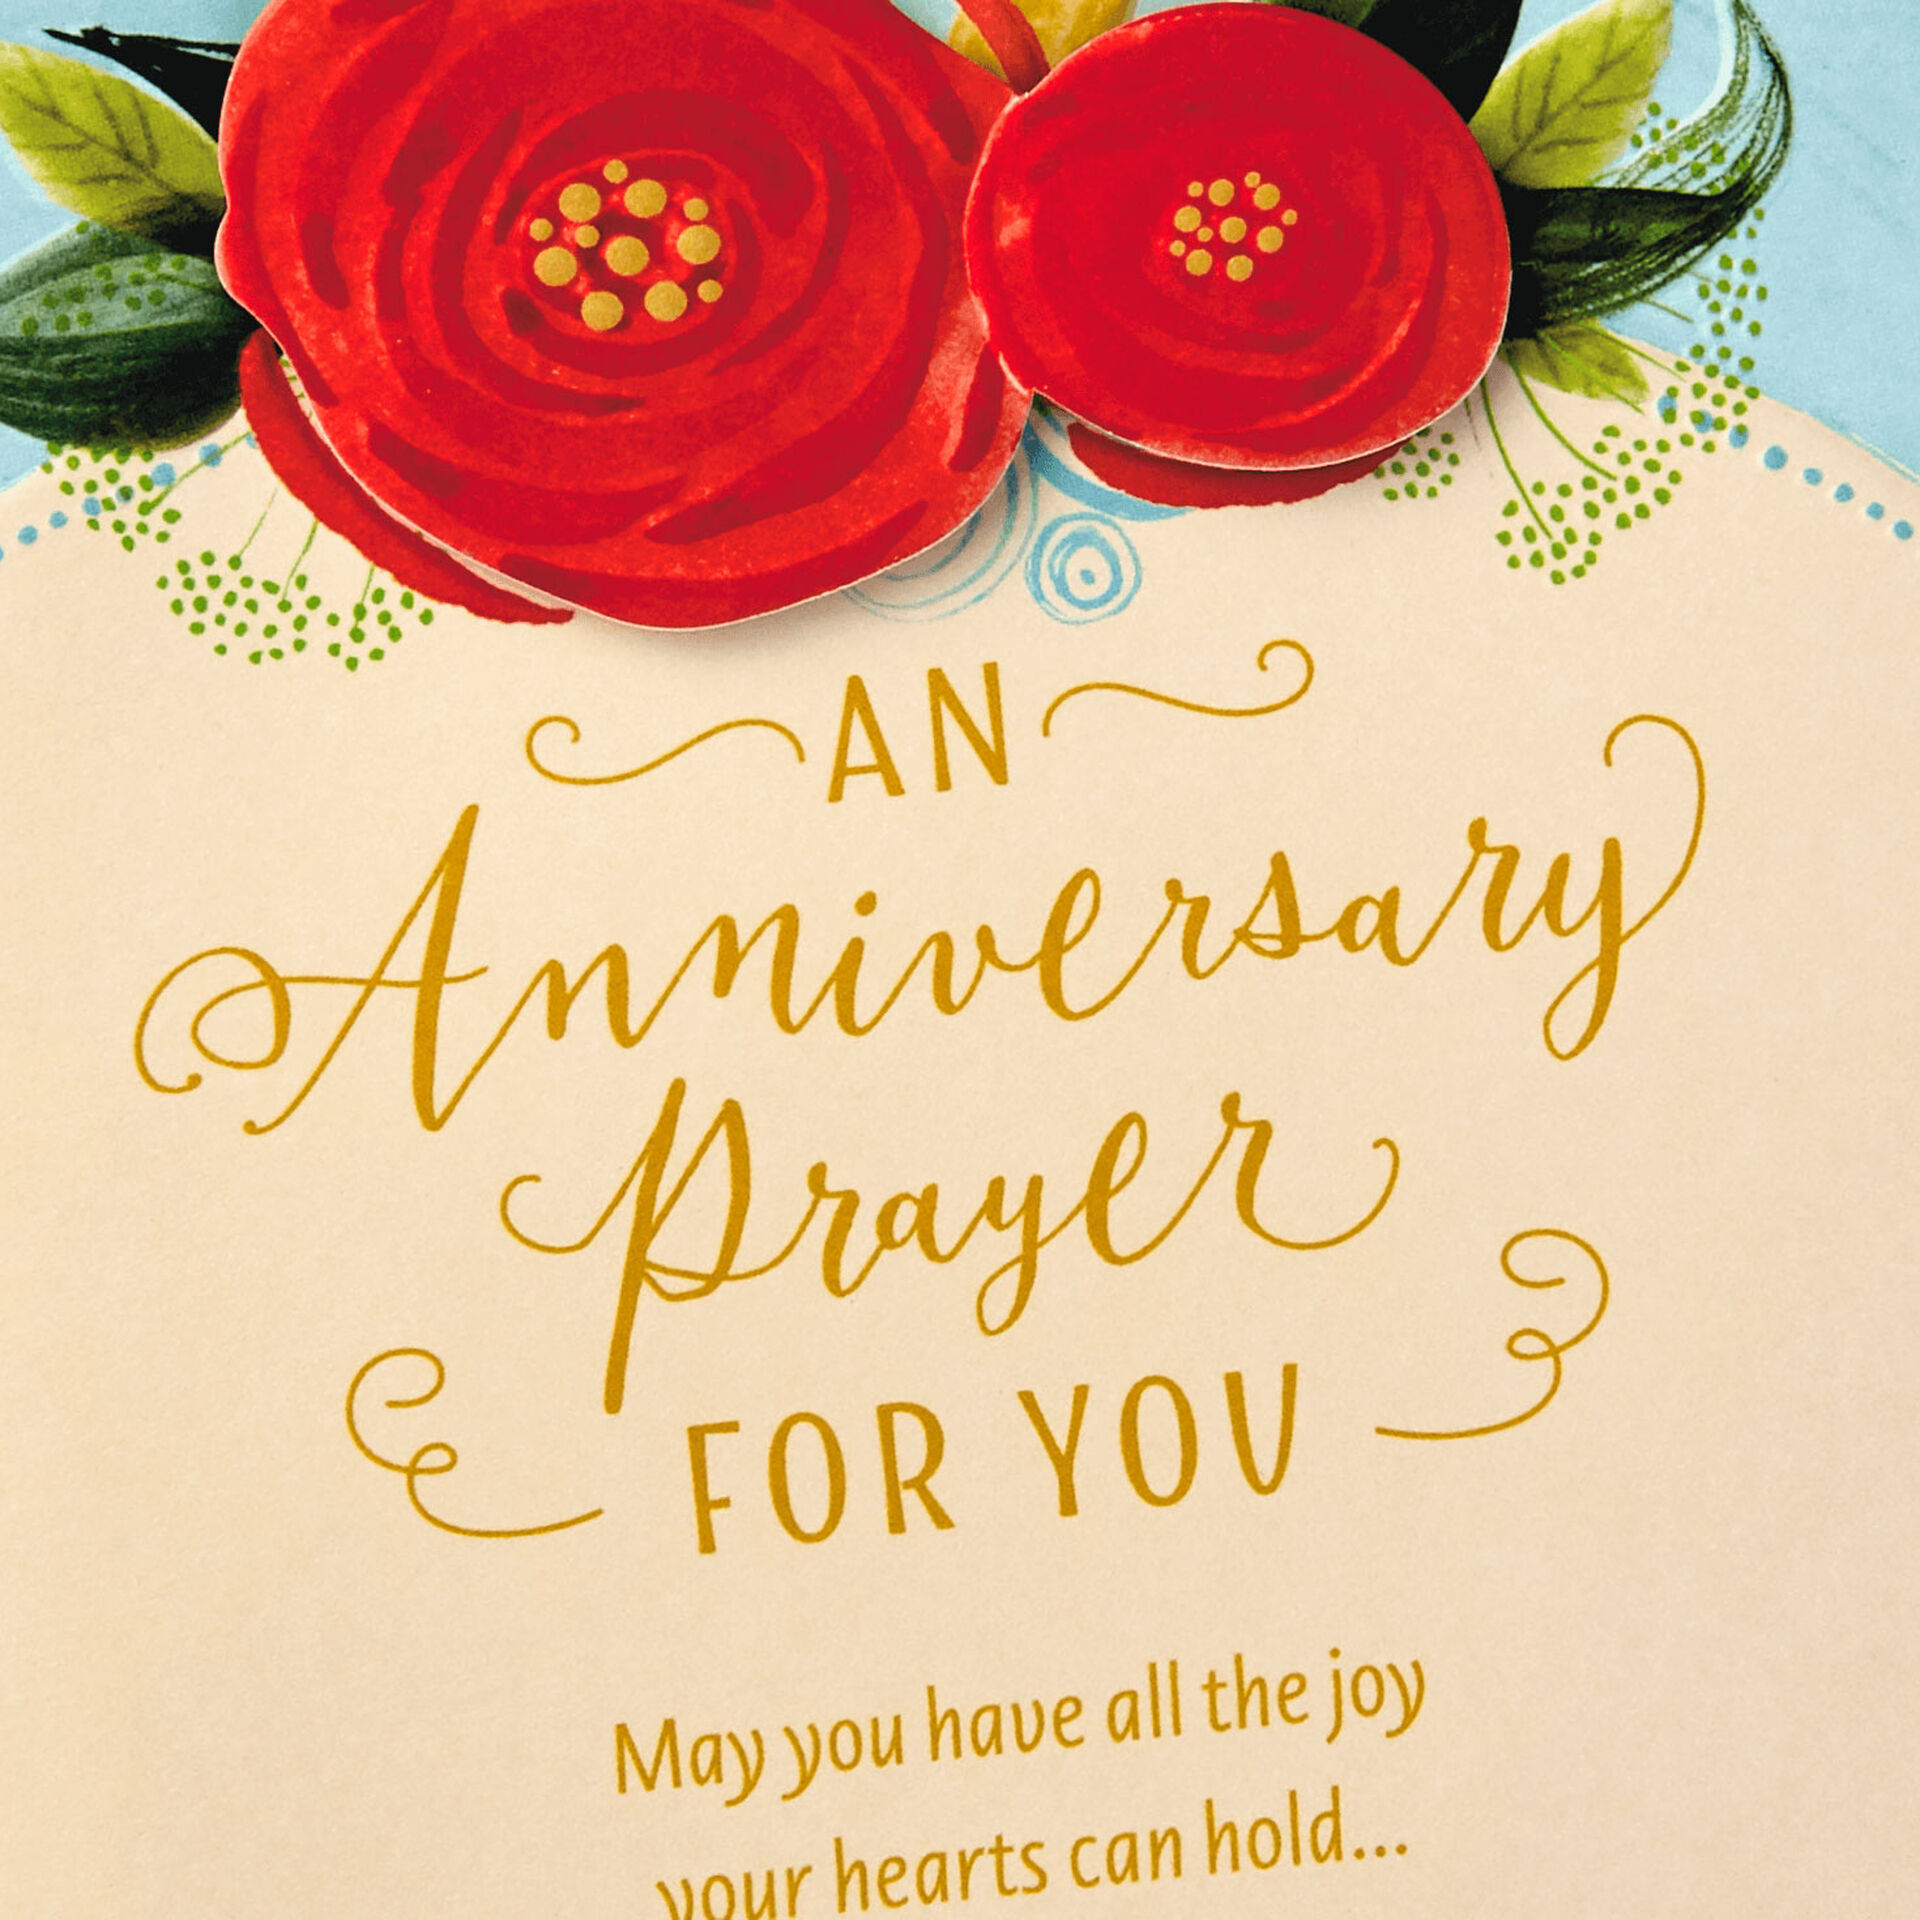 all-the-joy-your-hearts-can-hold-religious-anniversary-card-greeting